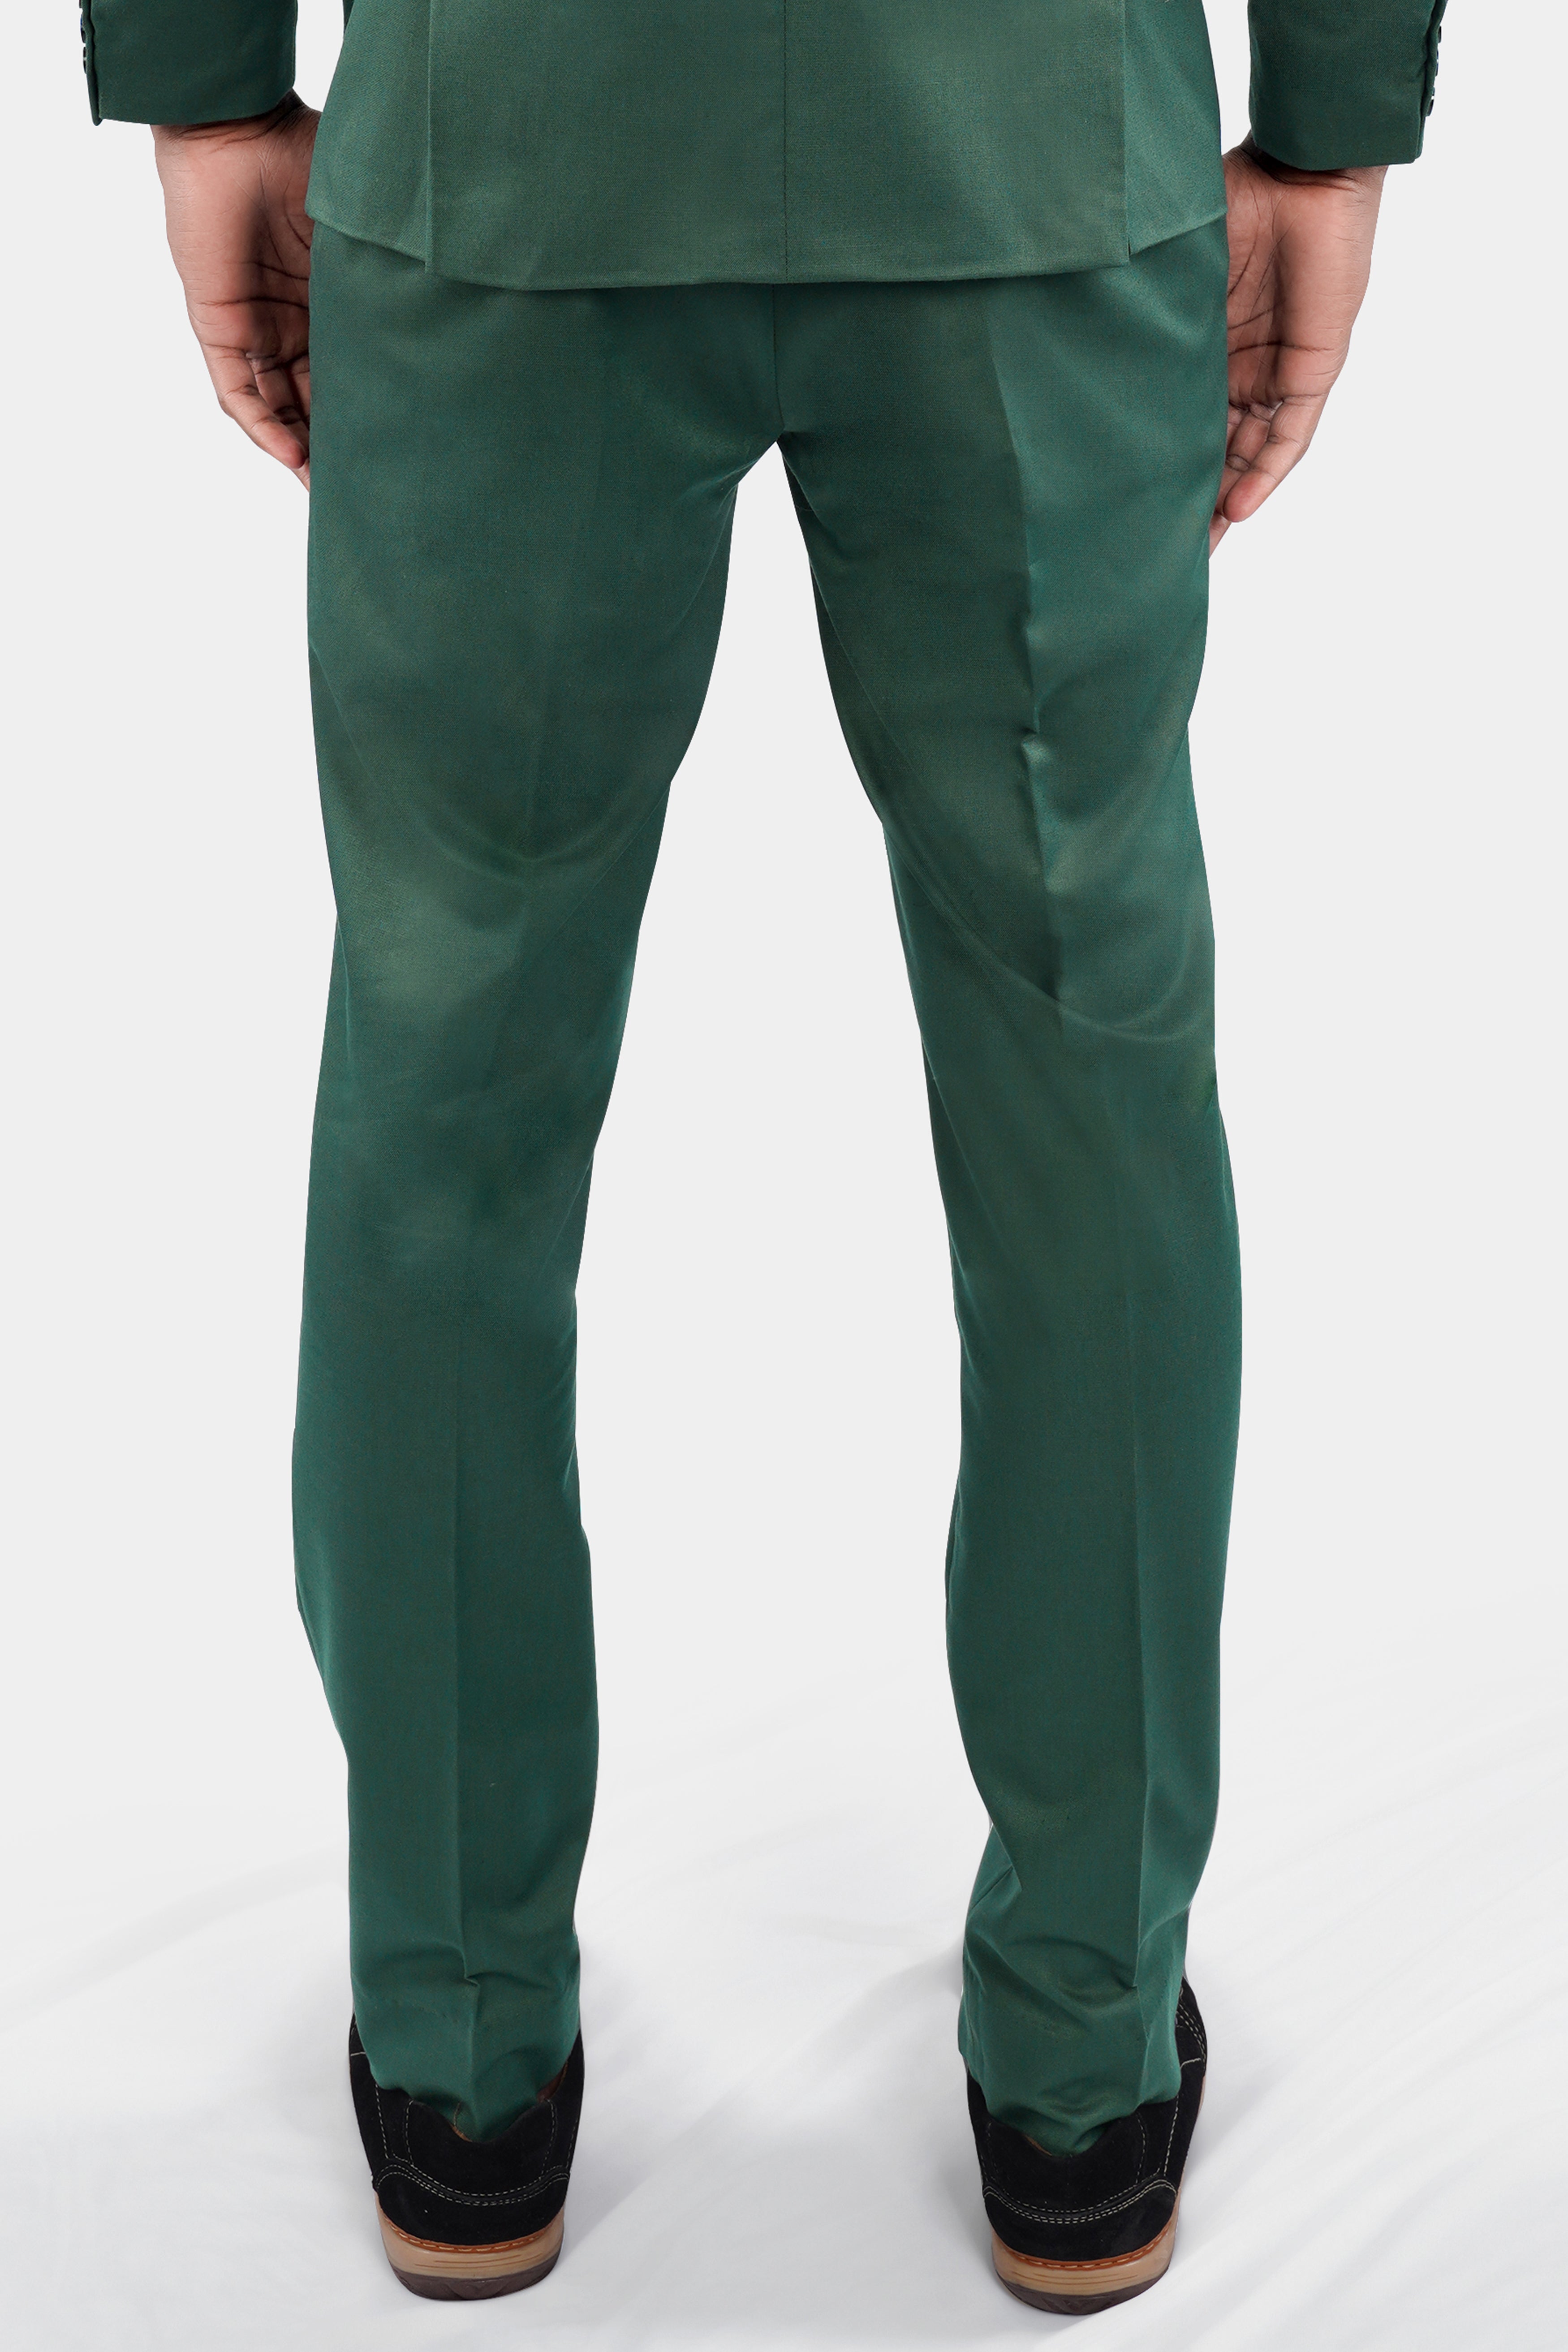 Everglade Green Wool Rich Stretchable traveler Pant T2710-28, T2710-30, T2710-32, T2710-34, T2710-36, T2710-38, T2710-40, T2710-42, T2710-44